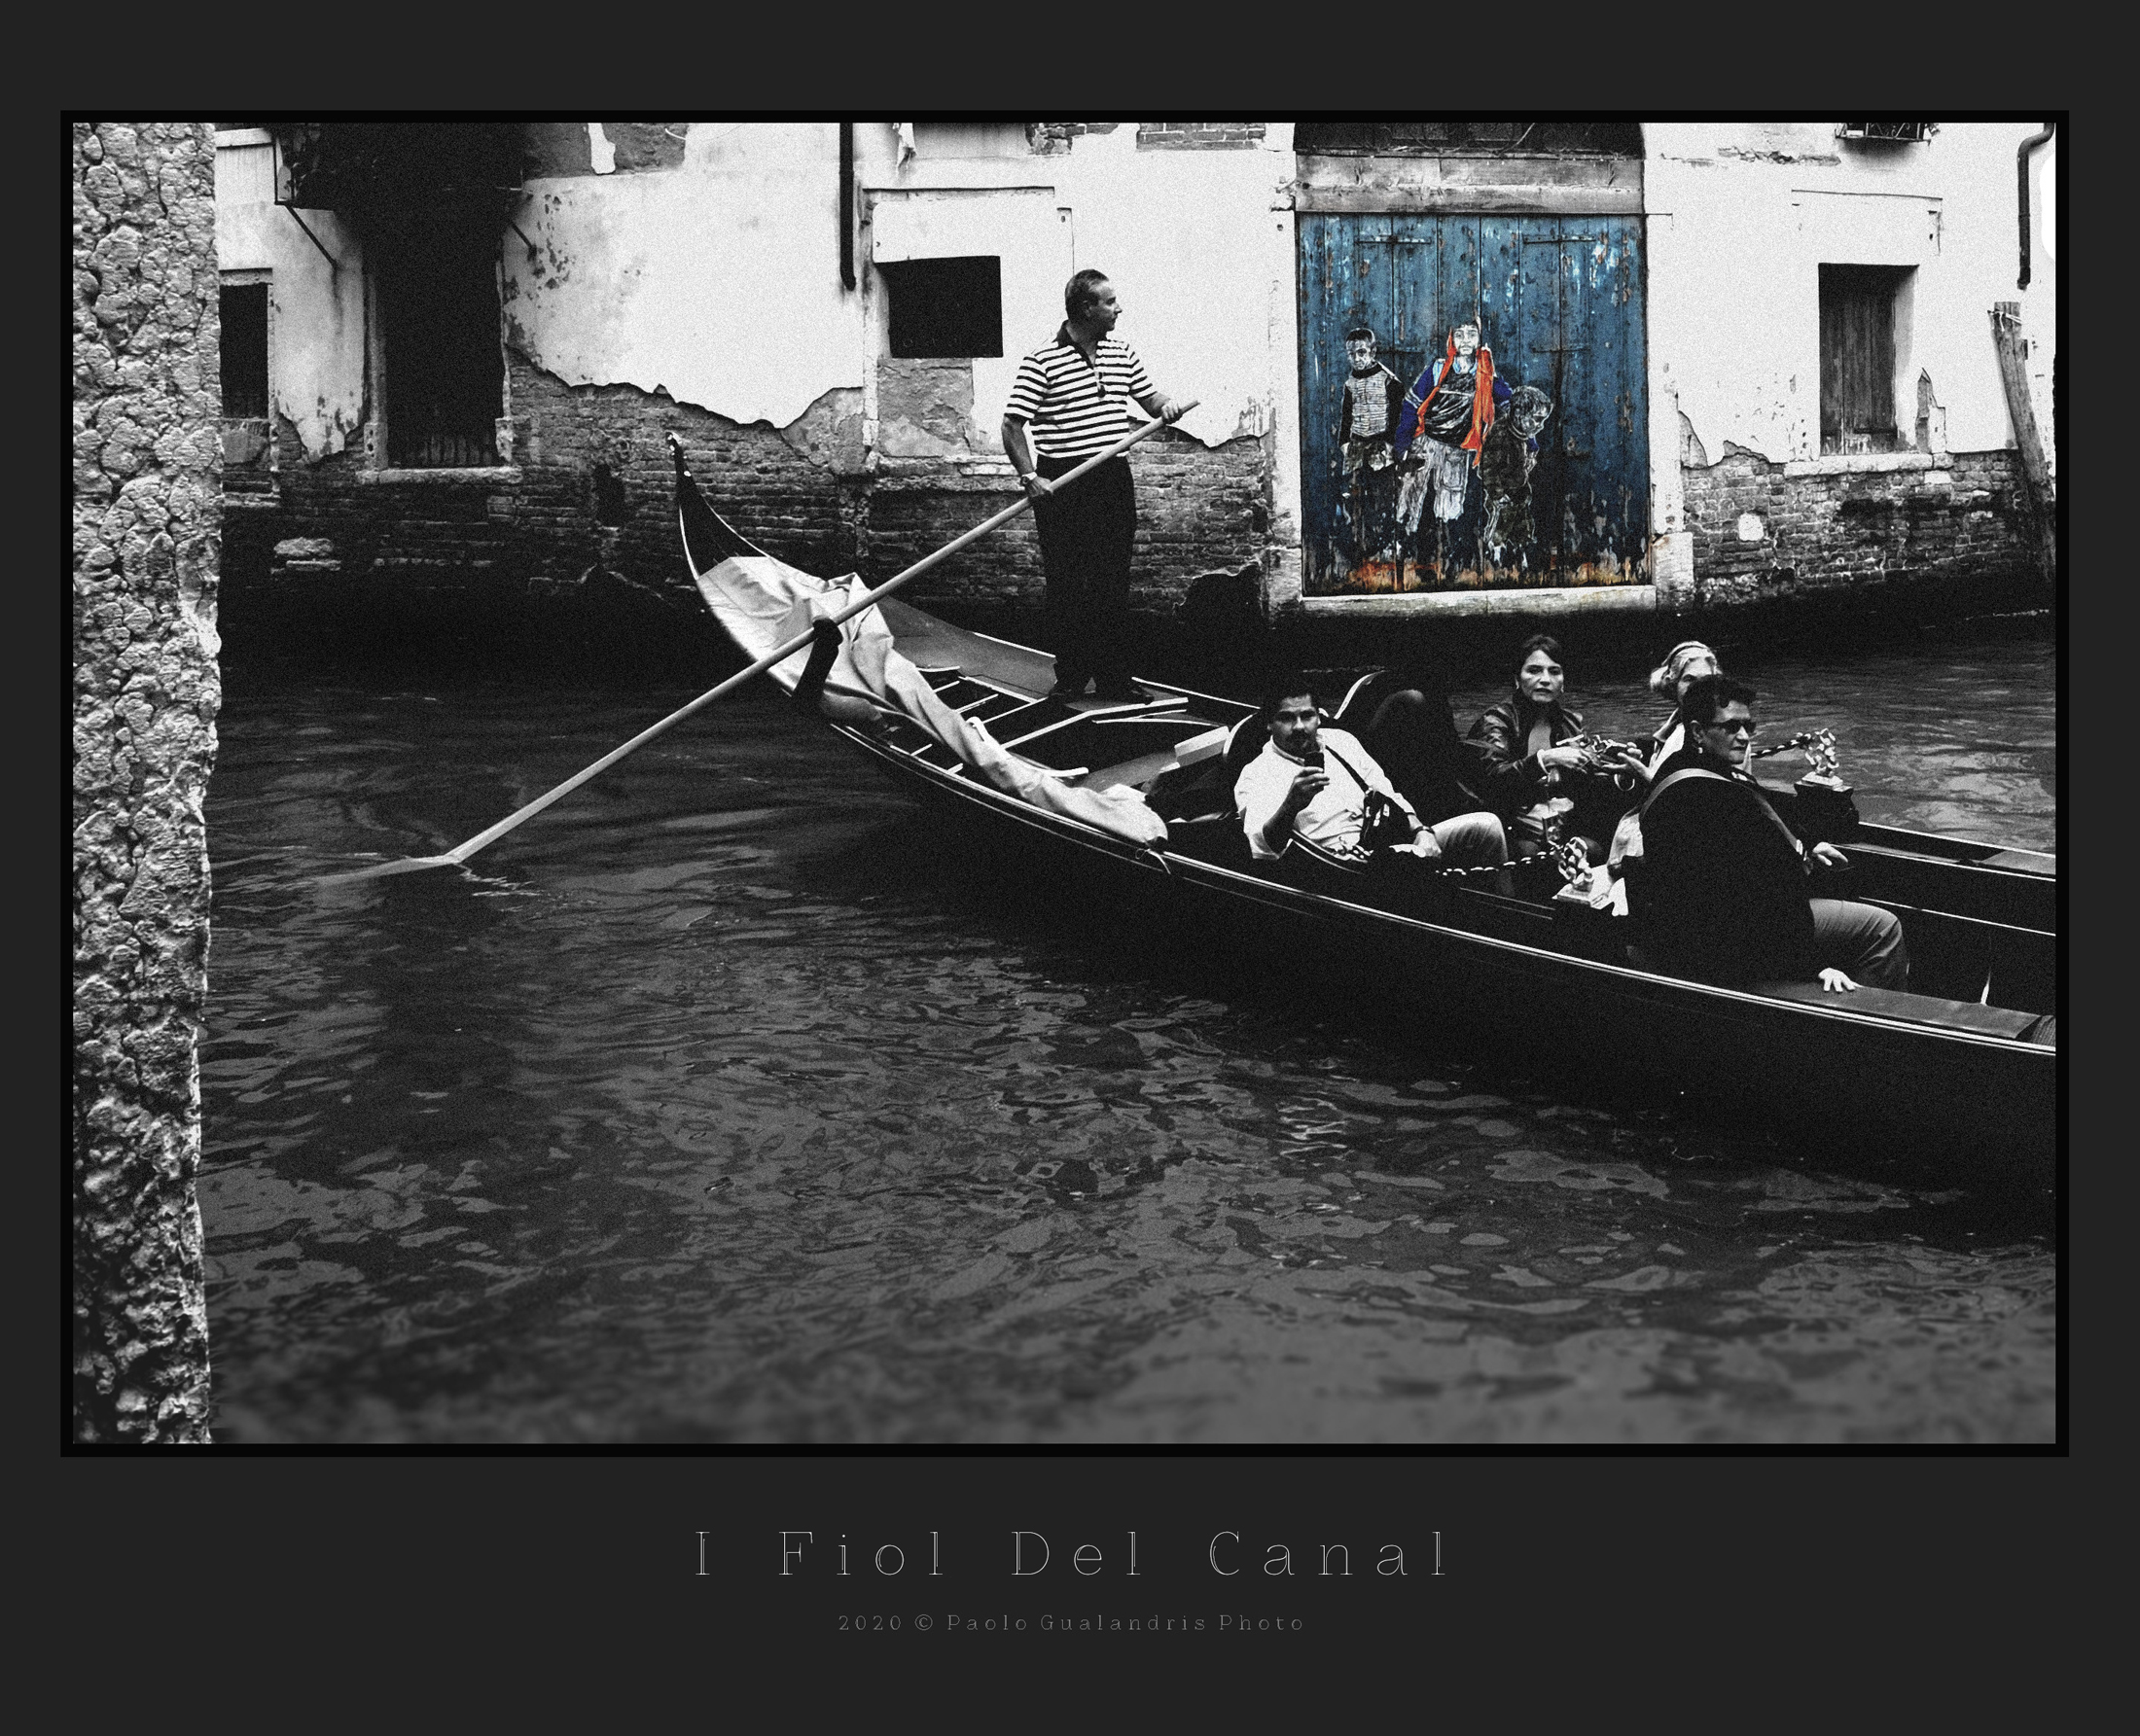 The Fiol Del Canal...